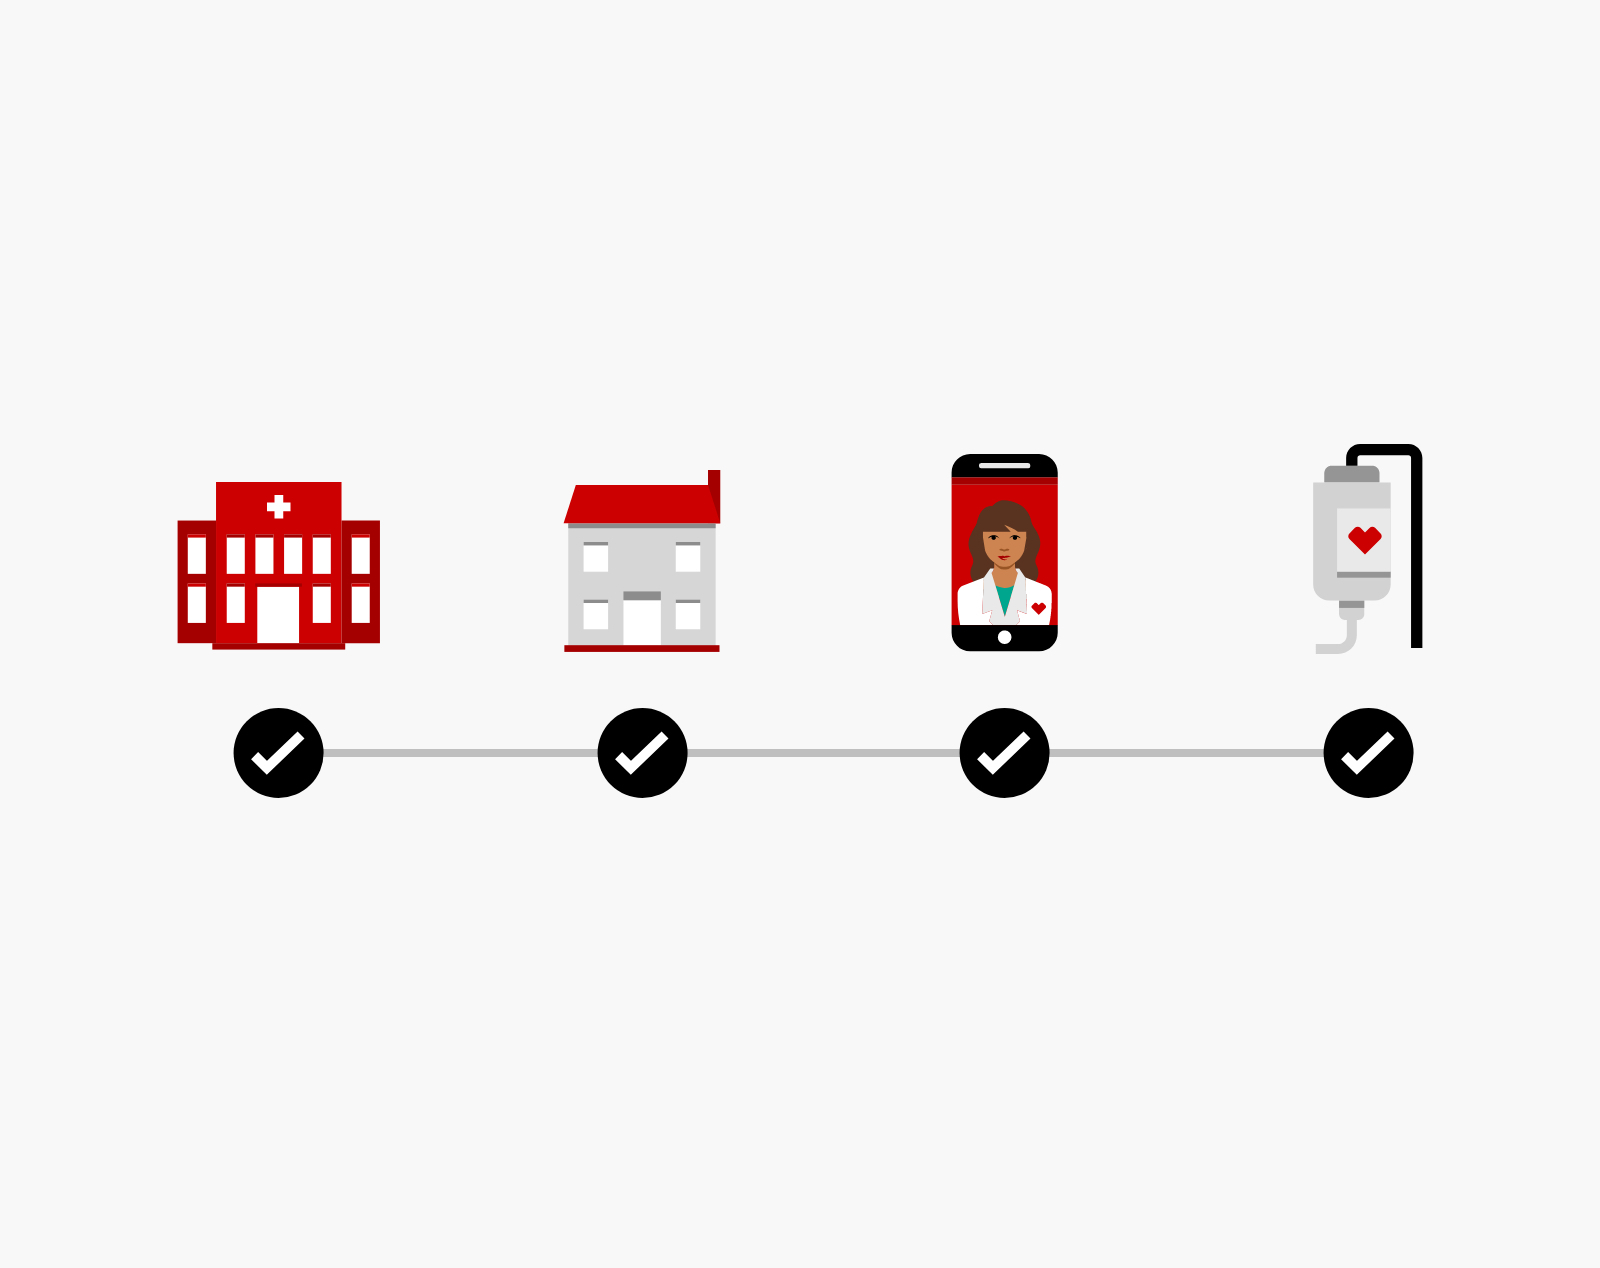 icons in timeline layout with checkmarks; icons include hospital, house, phone, iv